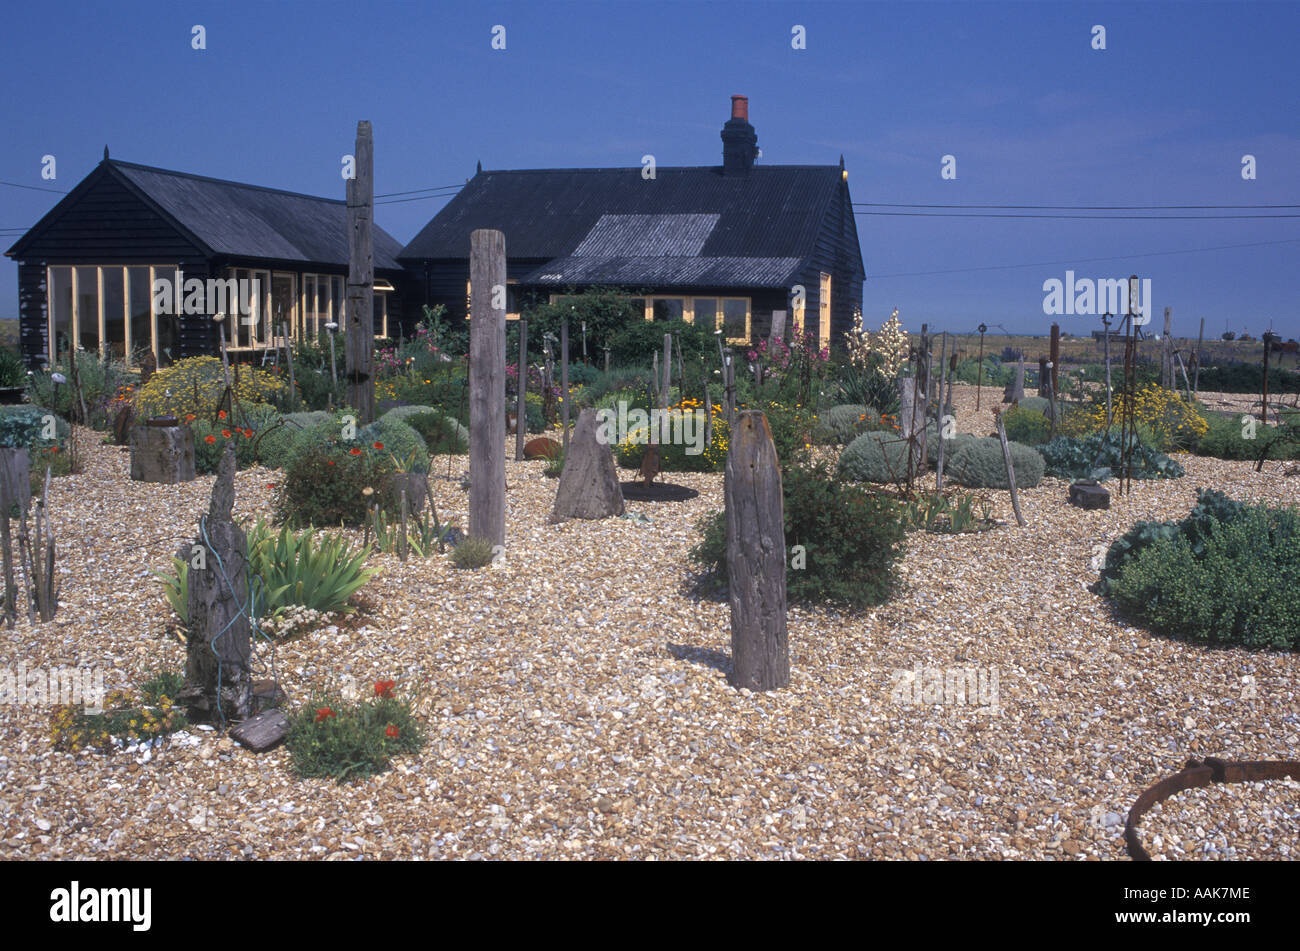 The House Prospect Cottage And Garden Of Derek Jarman Dungeness